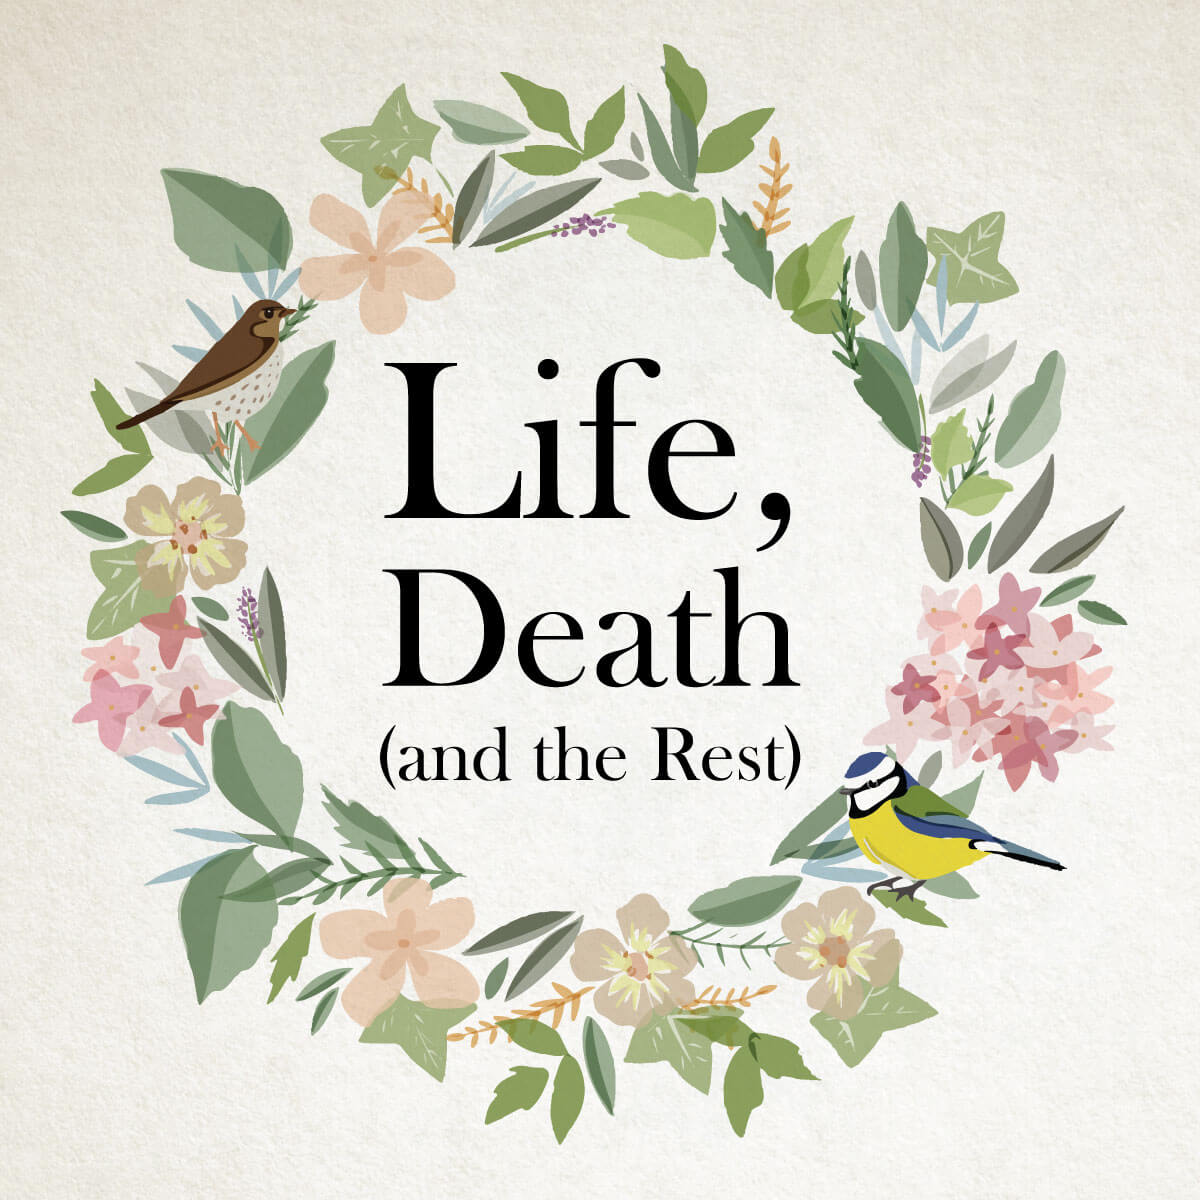 Life, Death and the Rest logo